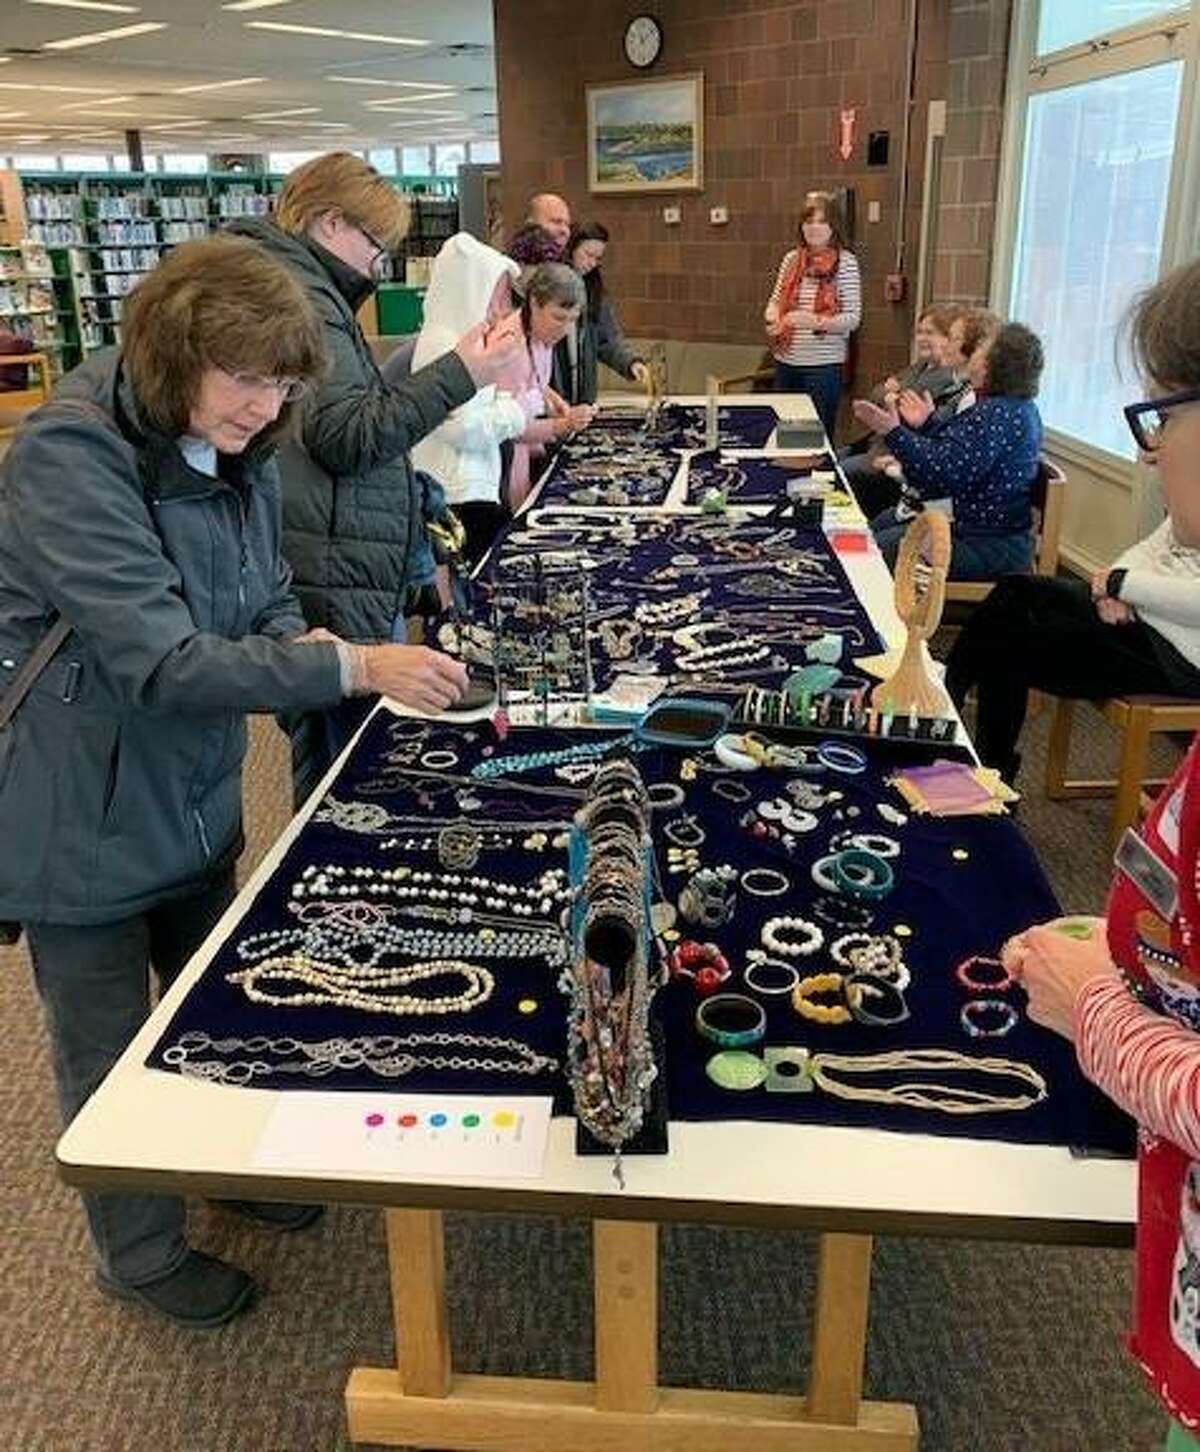 A sale of gently used jewelry will take place at the Milford Public Library on Saturday, Nov. 13, from 10 a.m. to 3 p.m. The Milford Public Library is located at 57 New Haven Ave., in Milford.